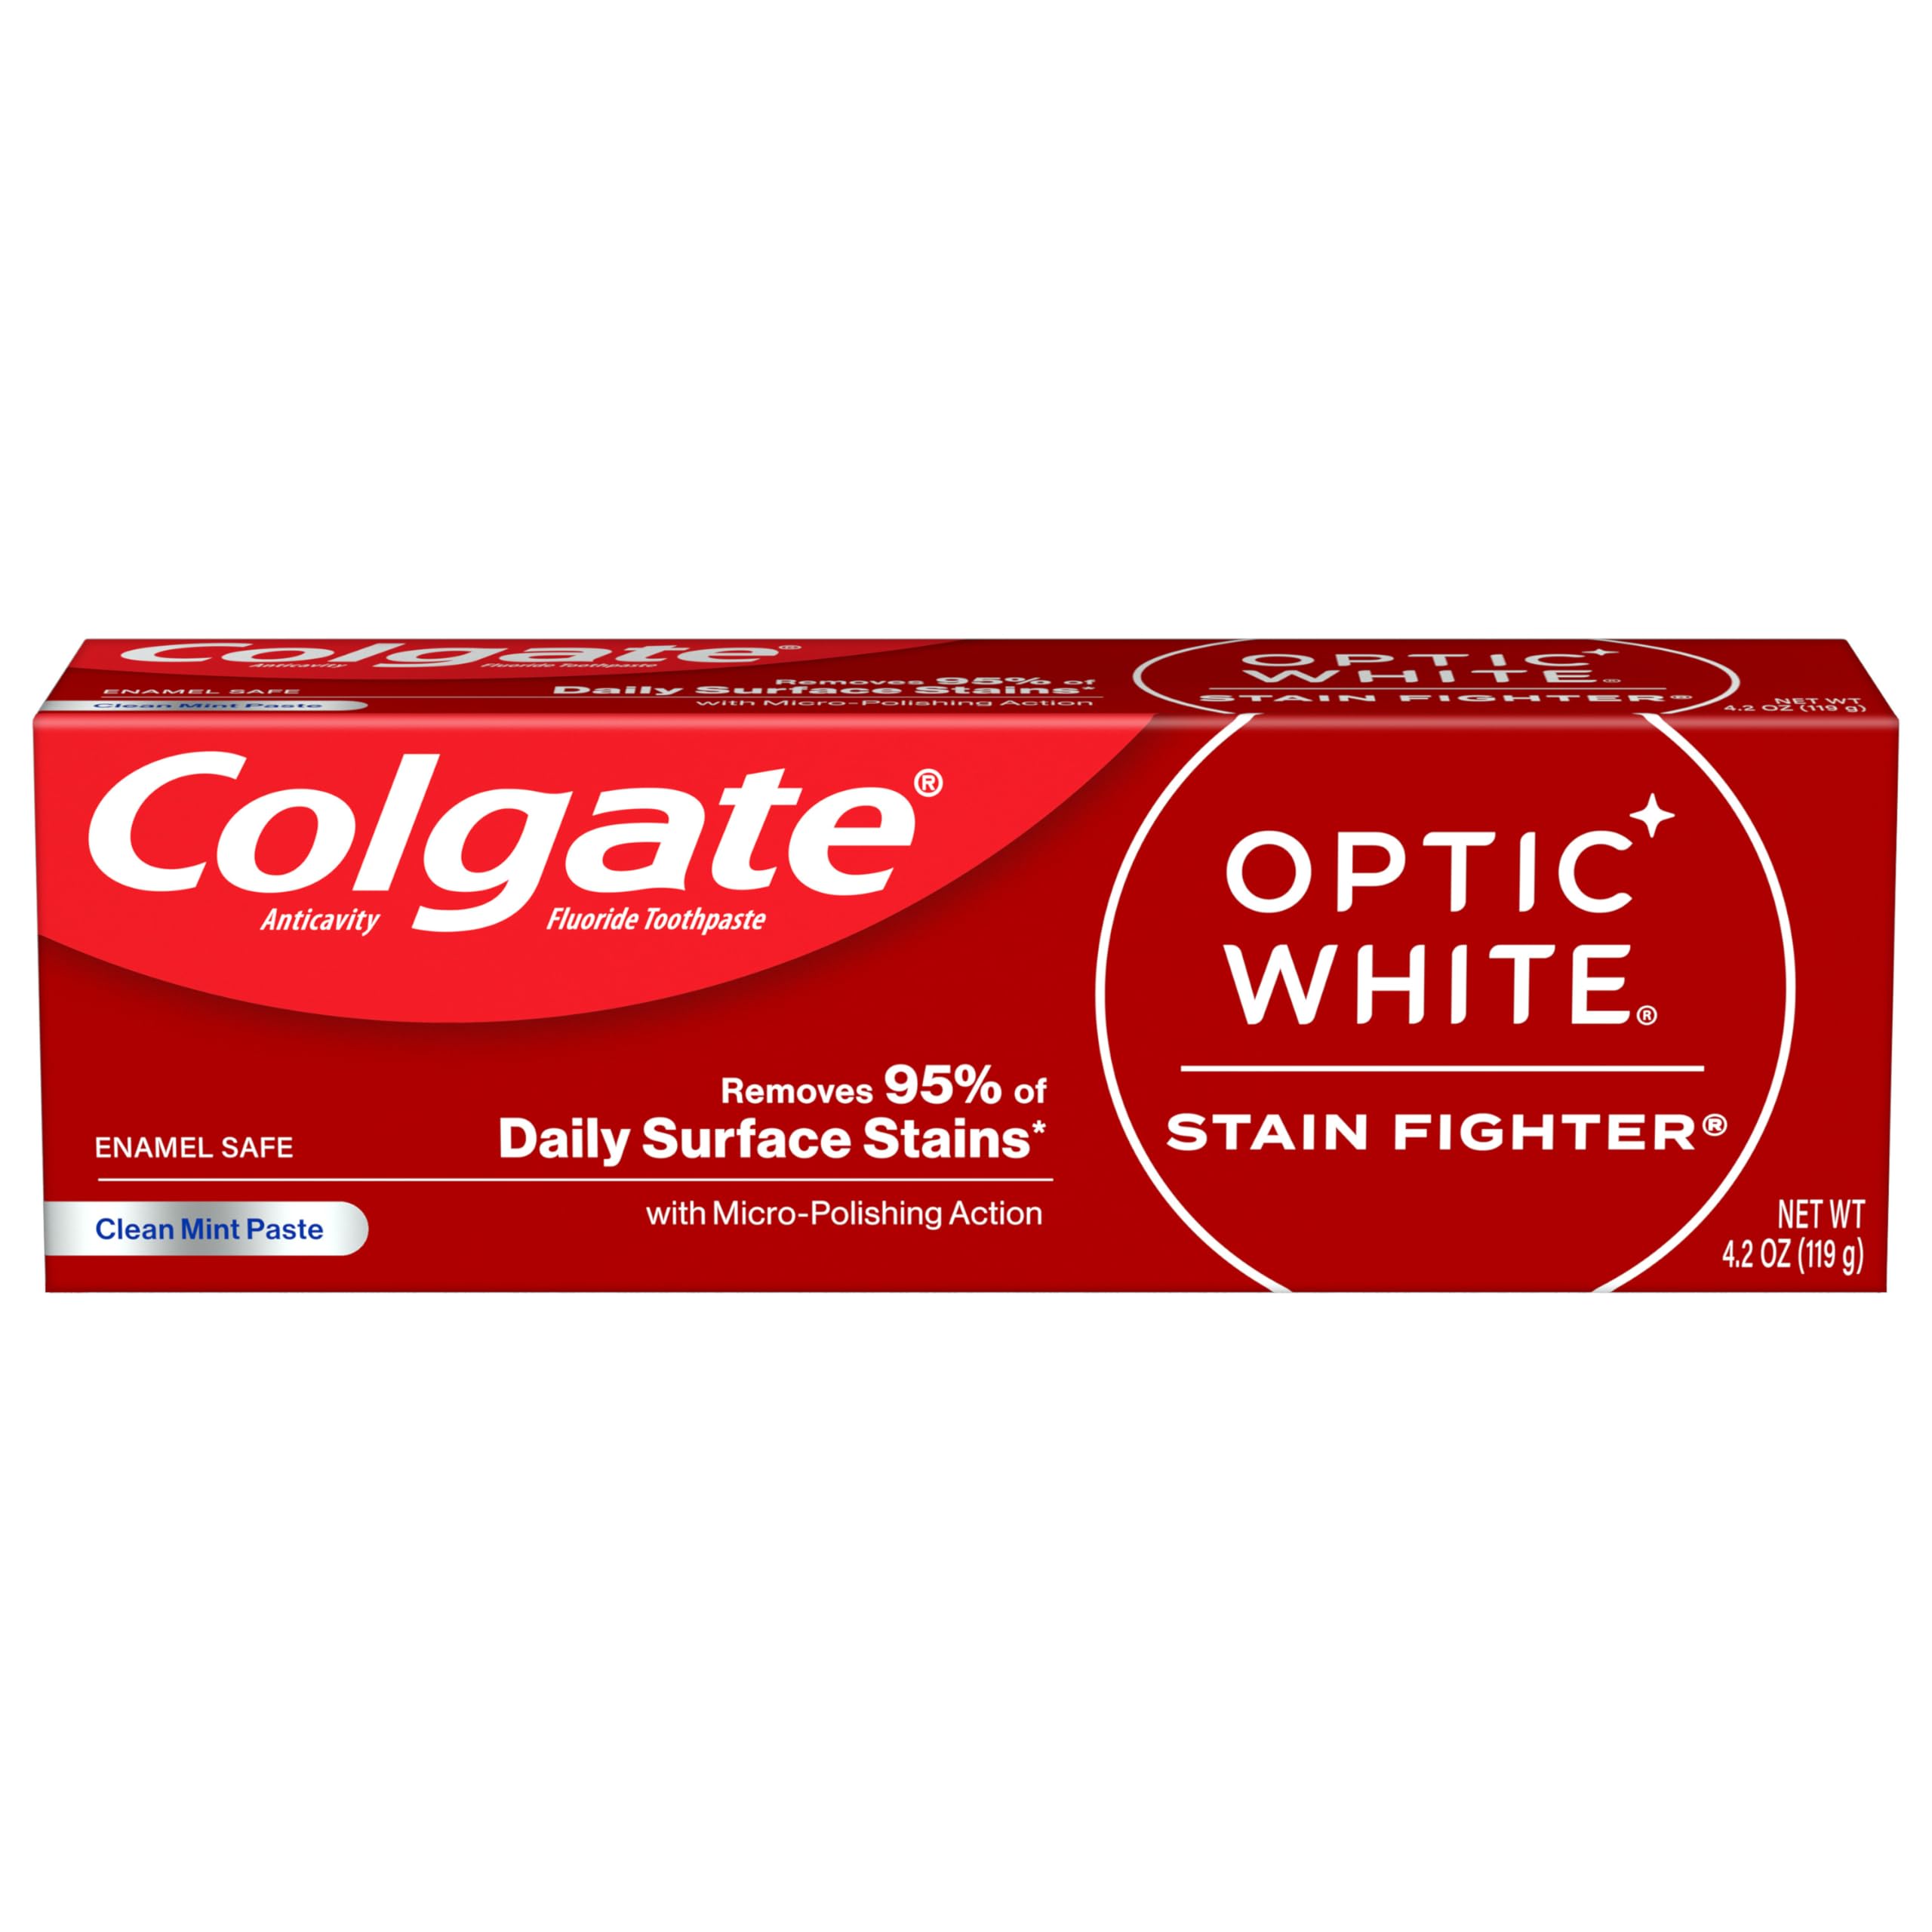 YMMV: 4.2-Oz Colgate Optic White Stain Fighter Whitening Toothpaste (Clean Mint Flavor) $1.20 w/ S&S + Free Shipping w/ Prime or on $35+